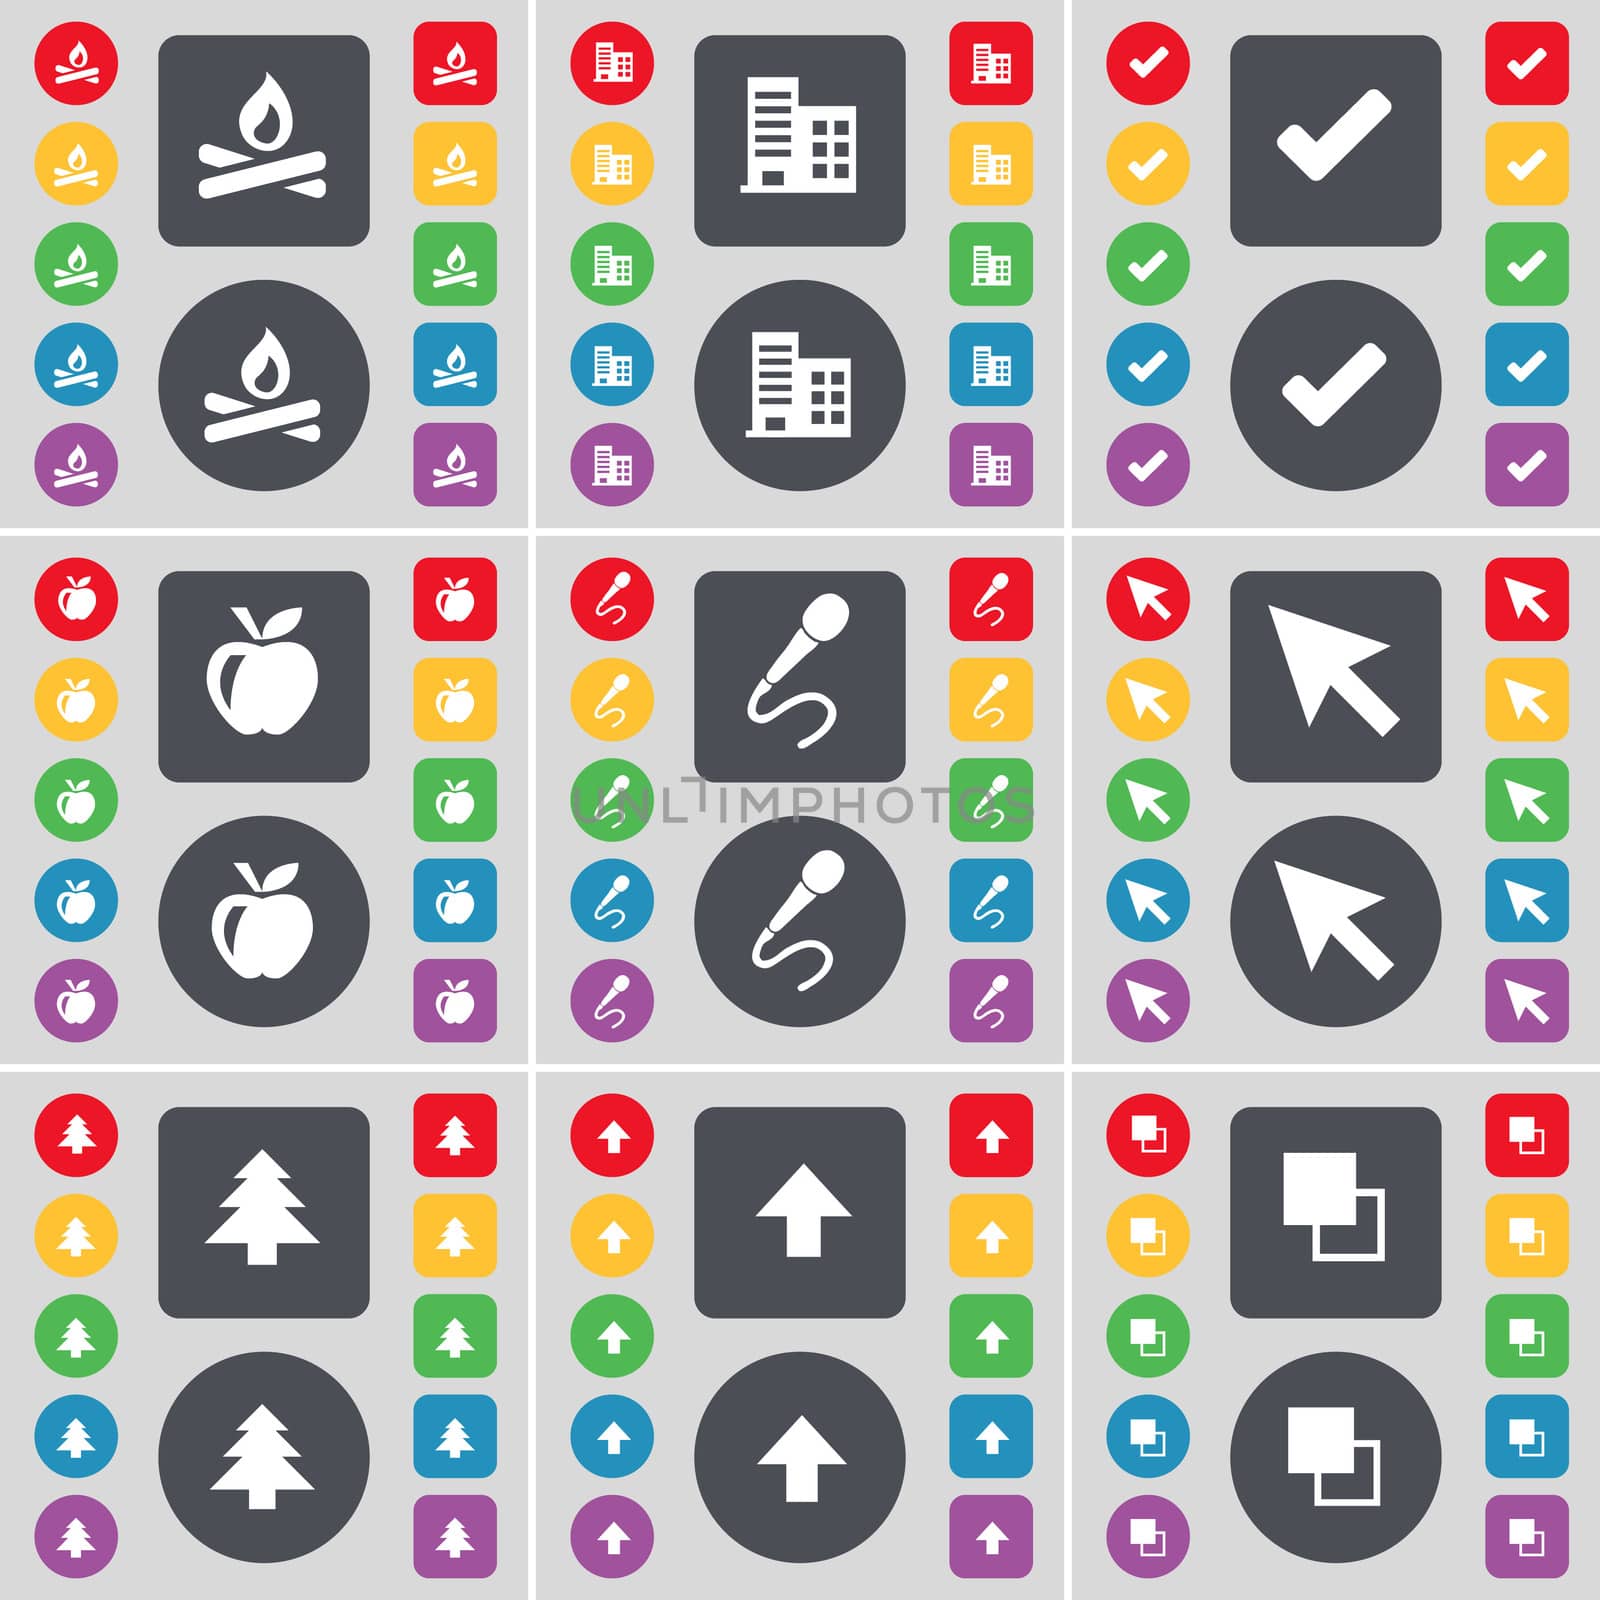 Campfire, Building, Tick, Apple, Microphone, Cursor, Firtree, Arrow up, Copy icon symbol. A large set of flat, colored buttons for your design.  by serhii_lohvyniuk